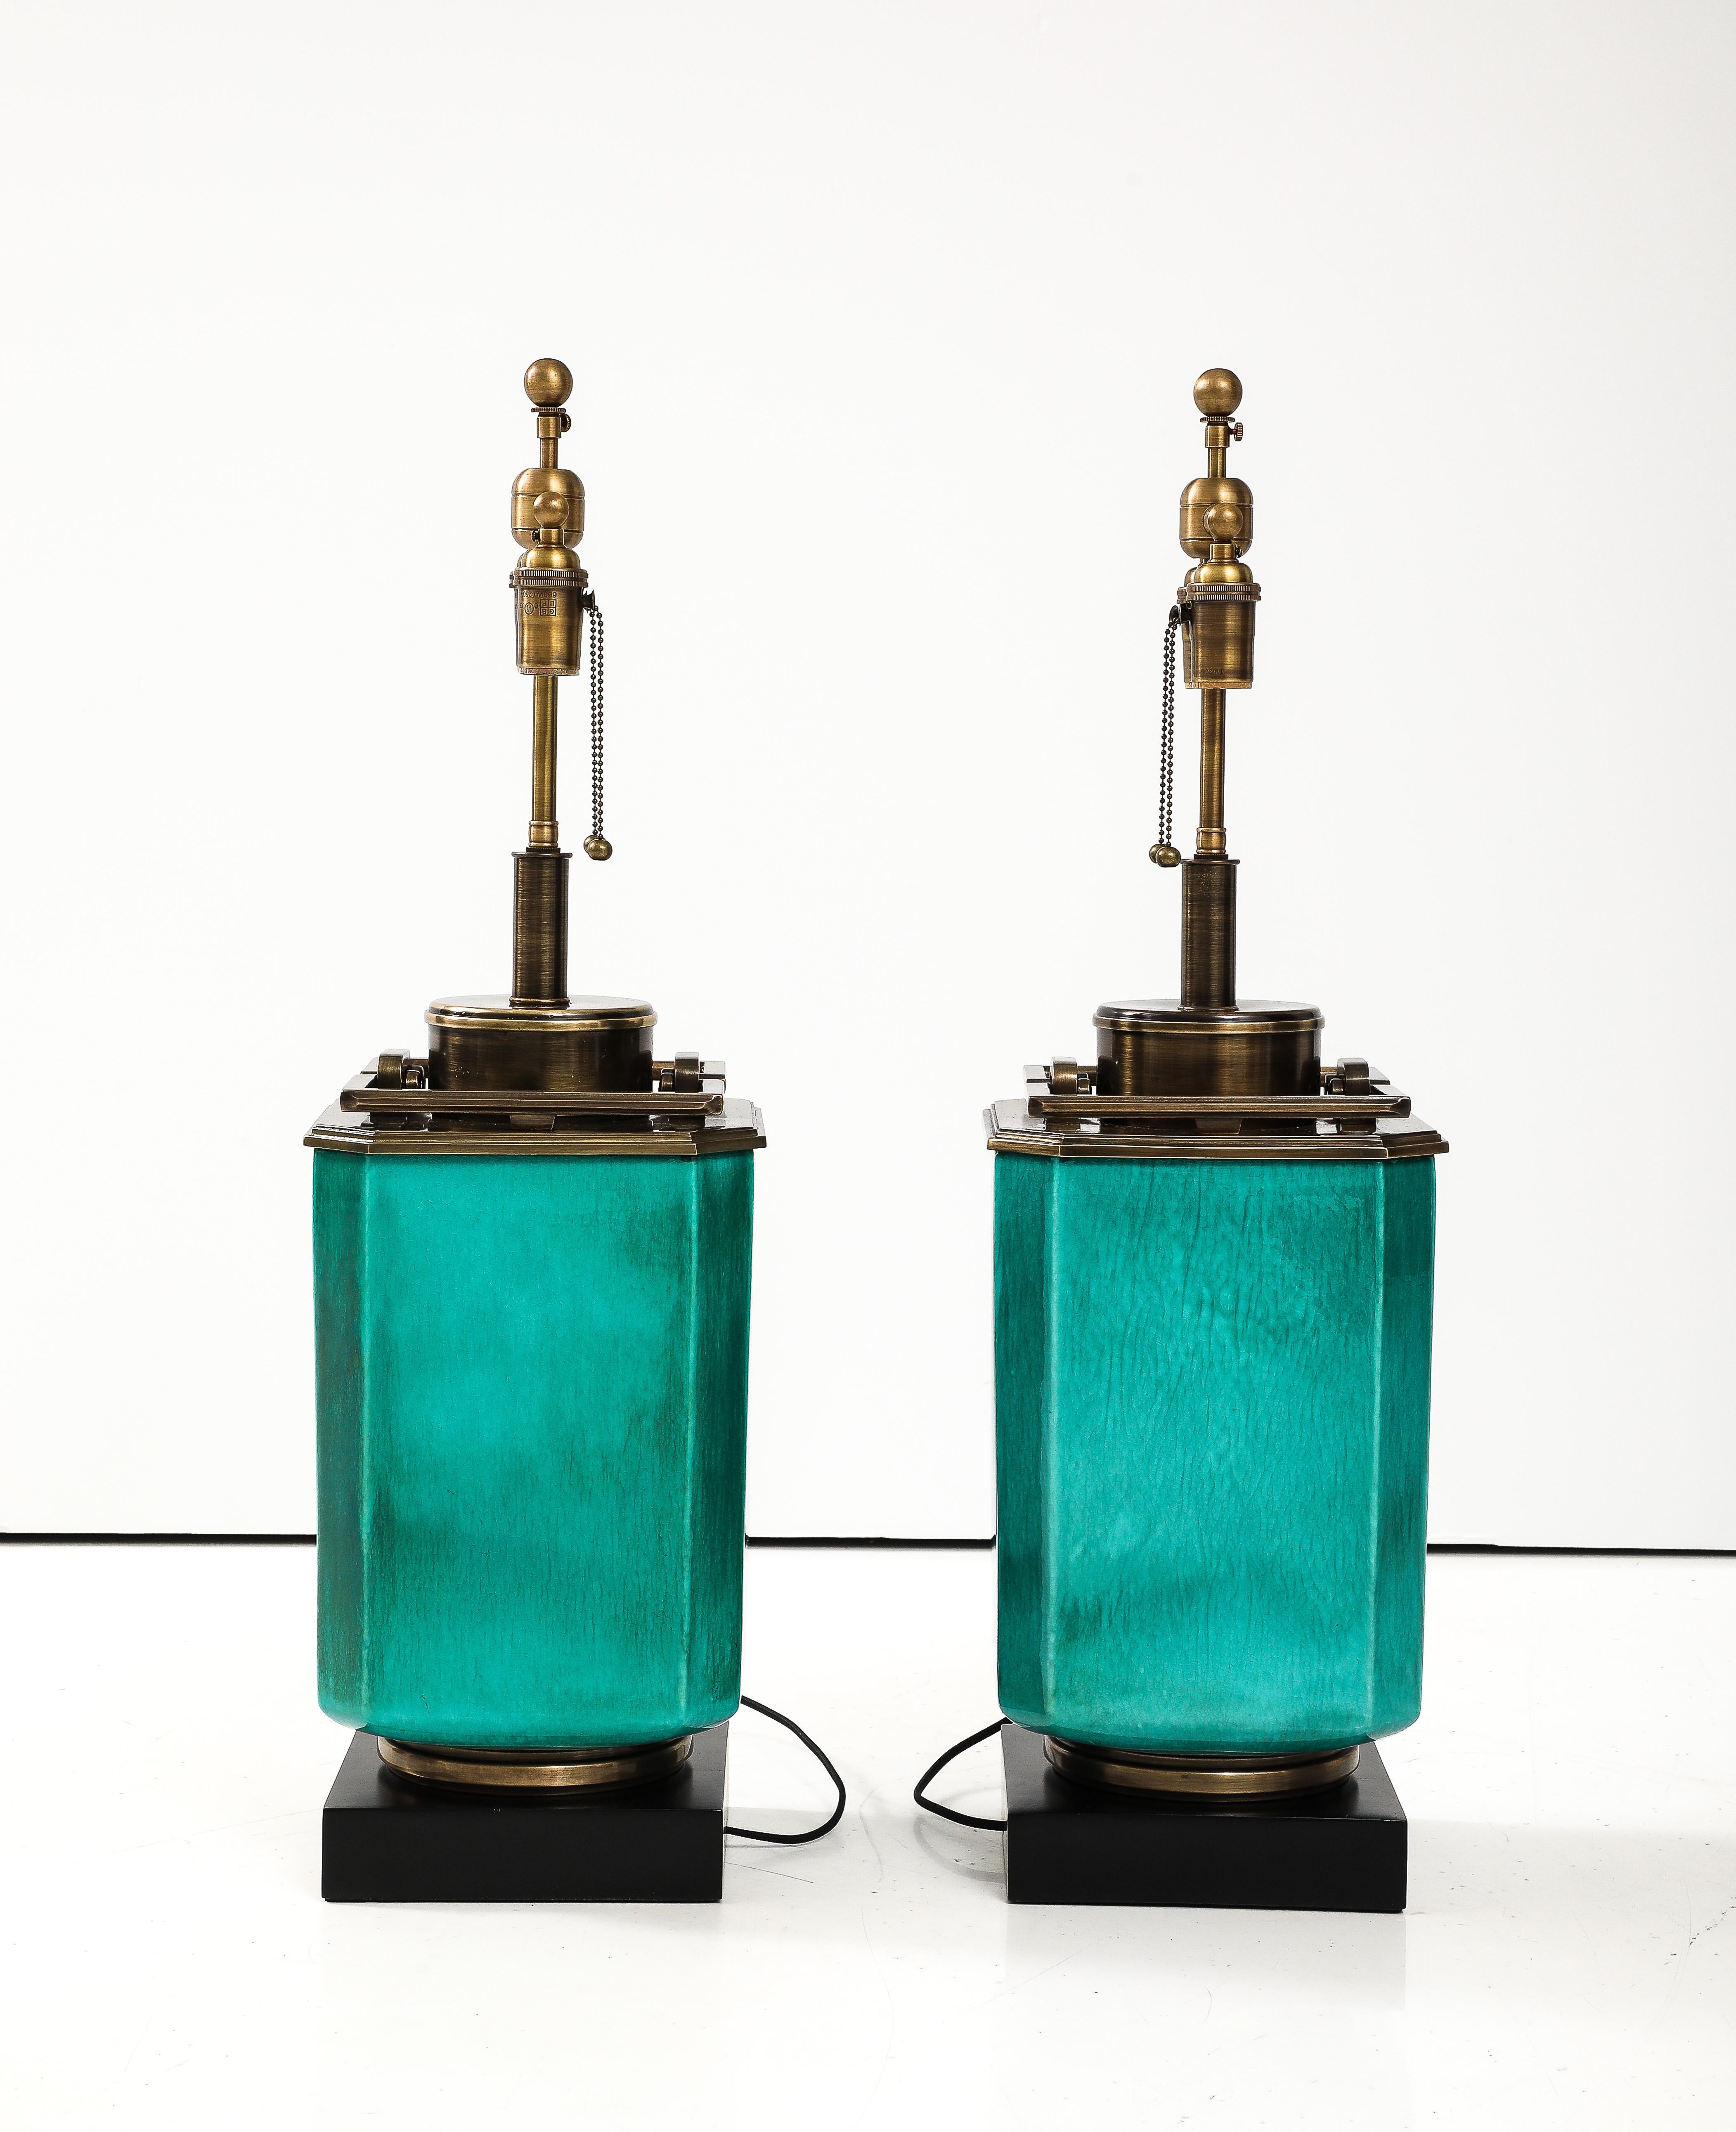 Brass Pair of 1960's Large Ceramic Lamps With a Jade Crackle Glaze Finish by Stiffel. For Sale